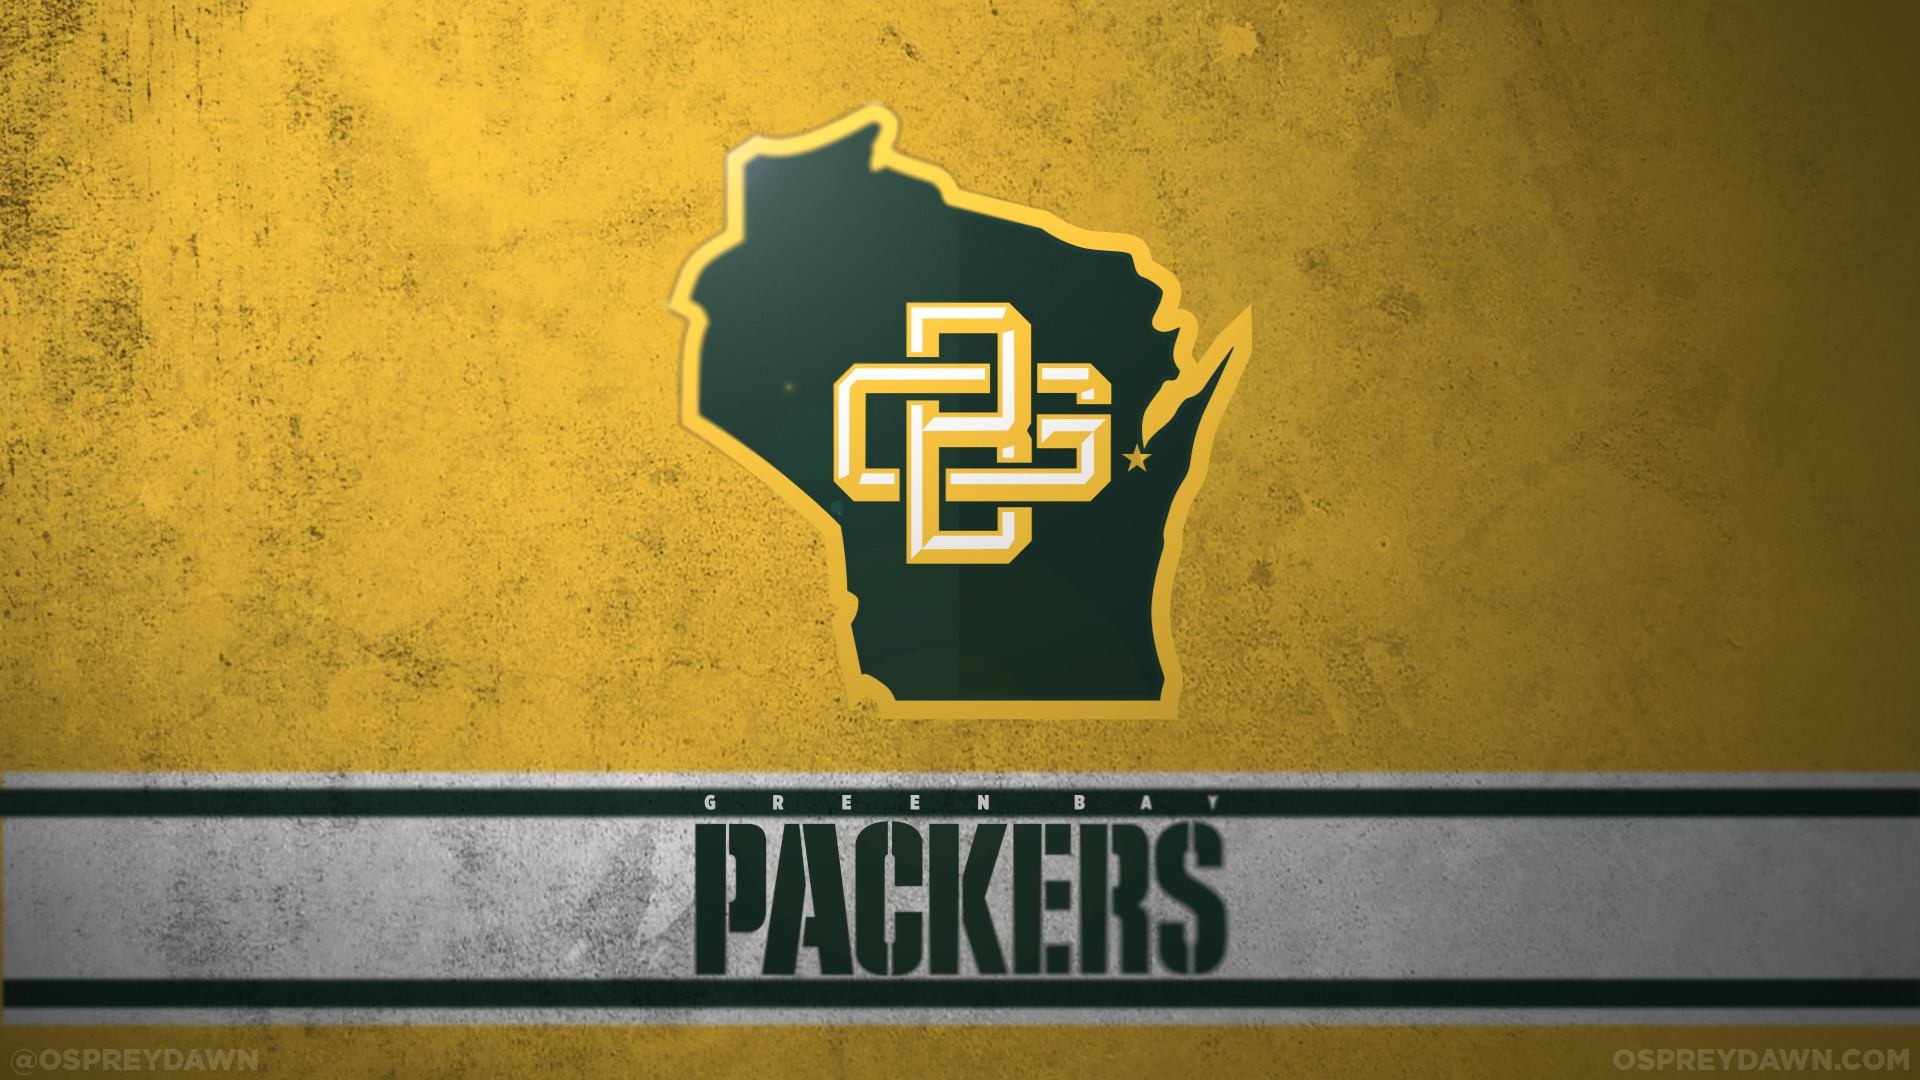 1000 images about Green Bay Packers interlocked GB monogram logo on Pinterest Green bay packers, Green and gold and Cap dagde